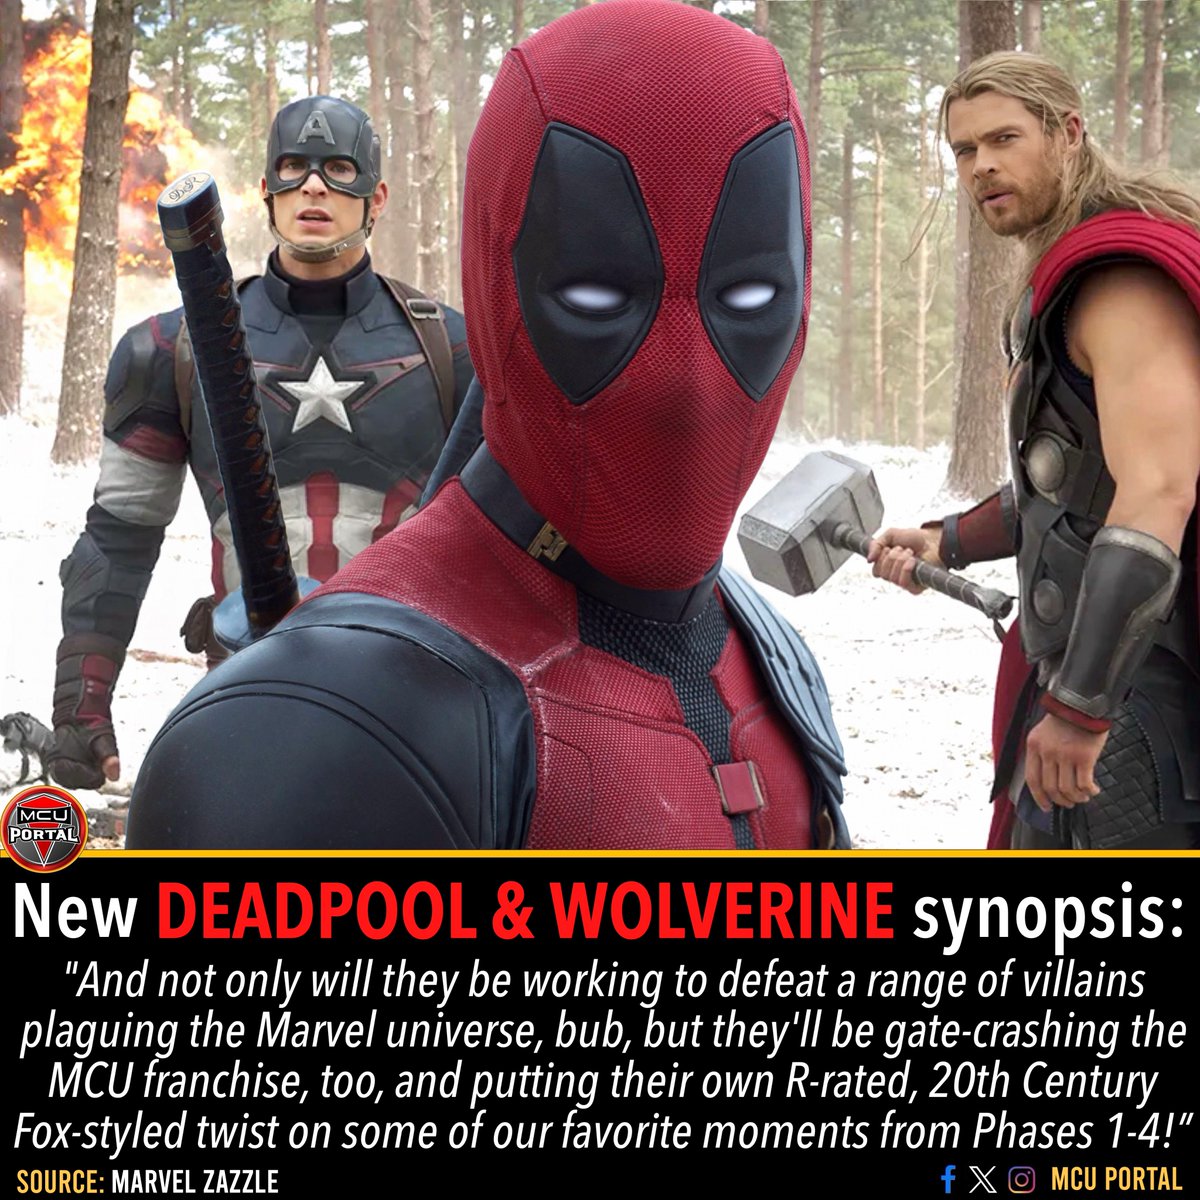 The official Marvel Zazzle store gives us a new synopsis for #DeadpoolAndWolverine!

#marvelstudios #mcu